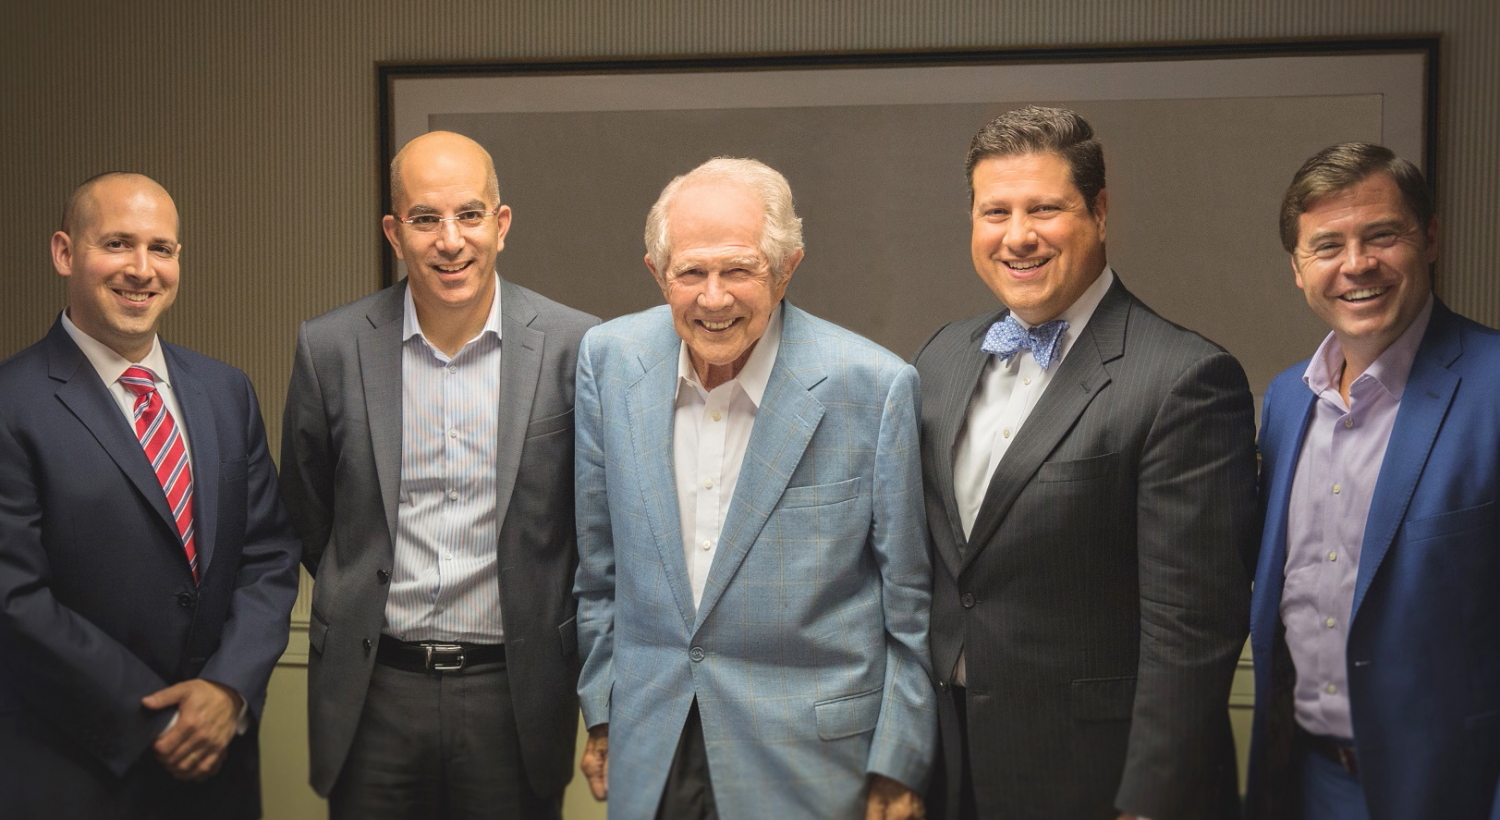 Left to right: Sam Friedman – Director Sales, Cyberbit, Adi Dar, CEO, Cyberbit, Dr. M.G. “Pat” Robertson, Regent Founder, Chancellor and CEO, Dr. Gerson Moreno-Riano, Regent Executive Vice President and Stephen Thomas, VP Sales, Cyberbit.